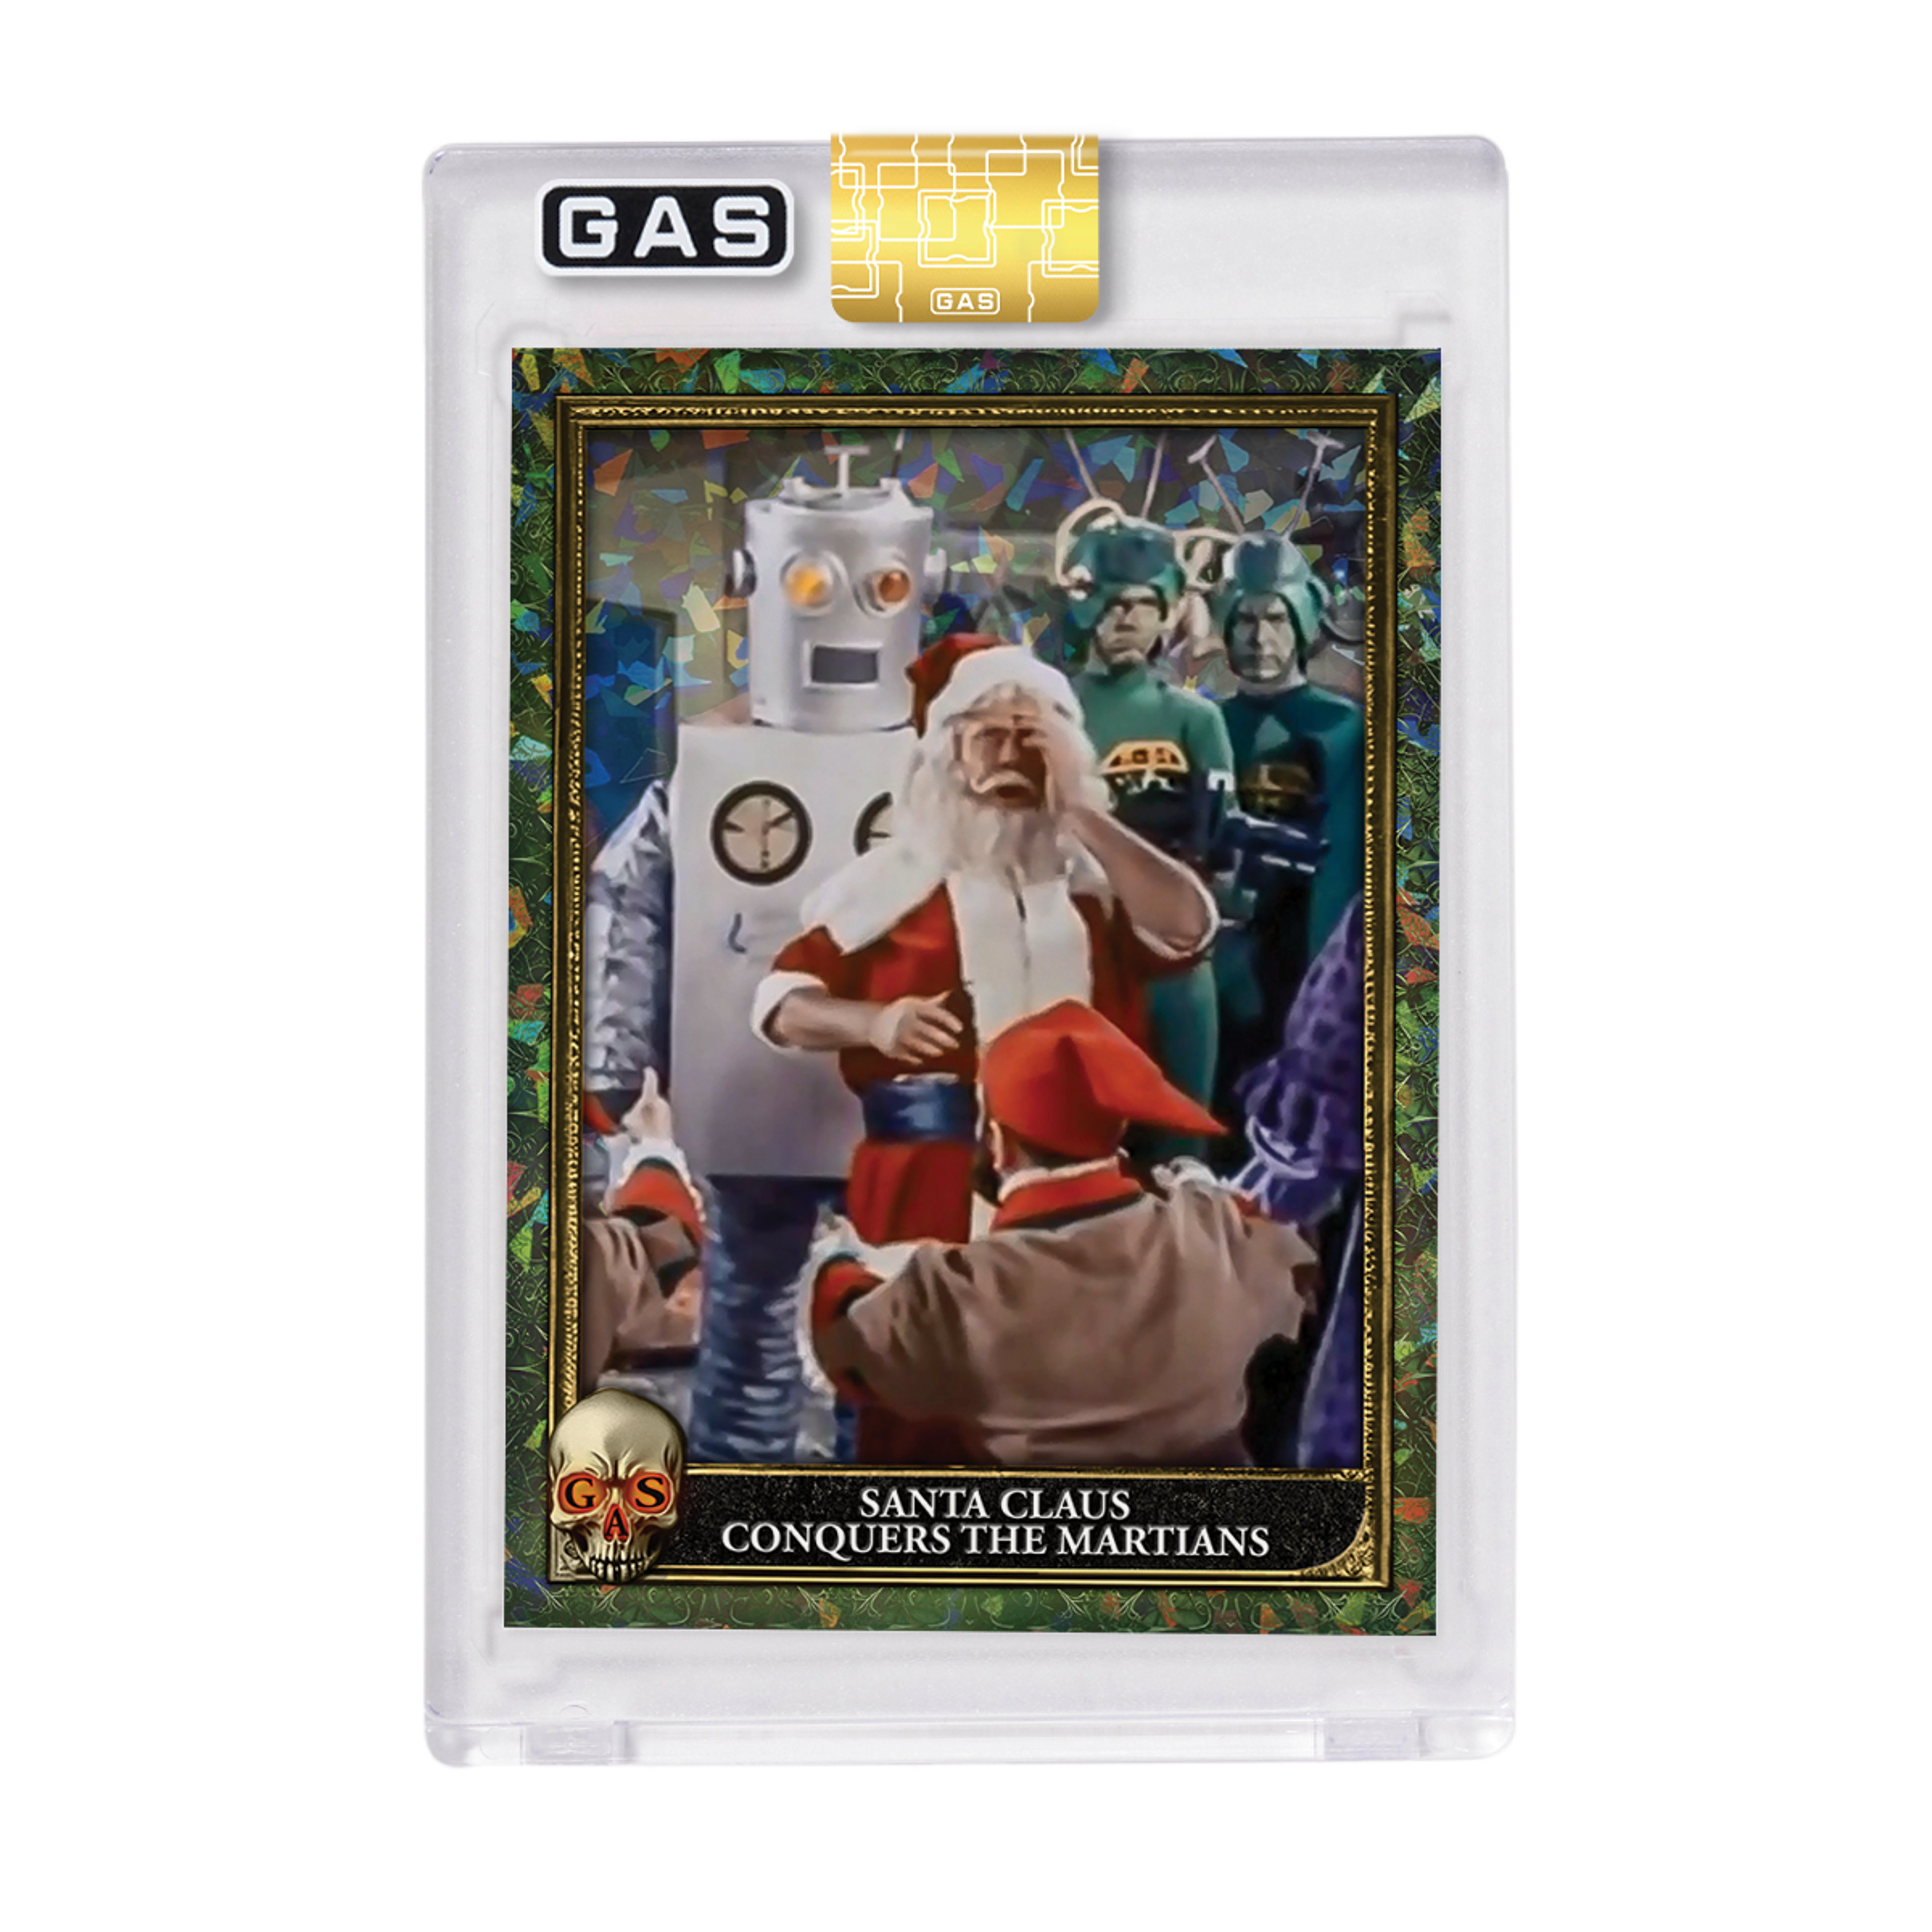 Limited Edition #5 Santa Claus Conquers The Martians Cracked Foi